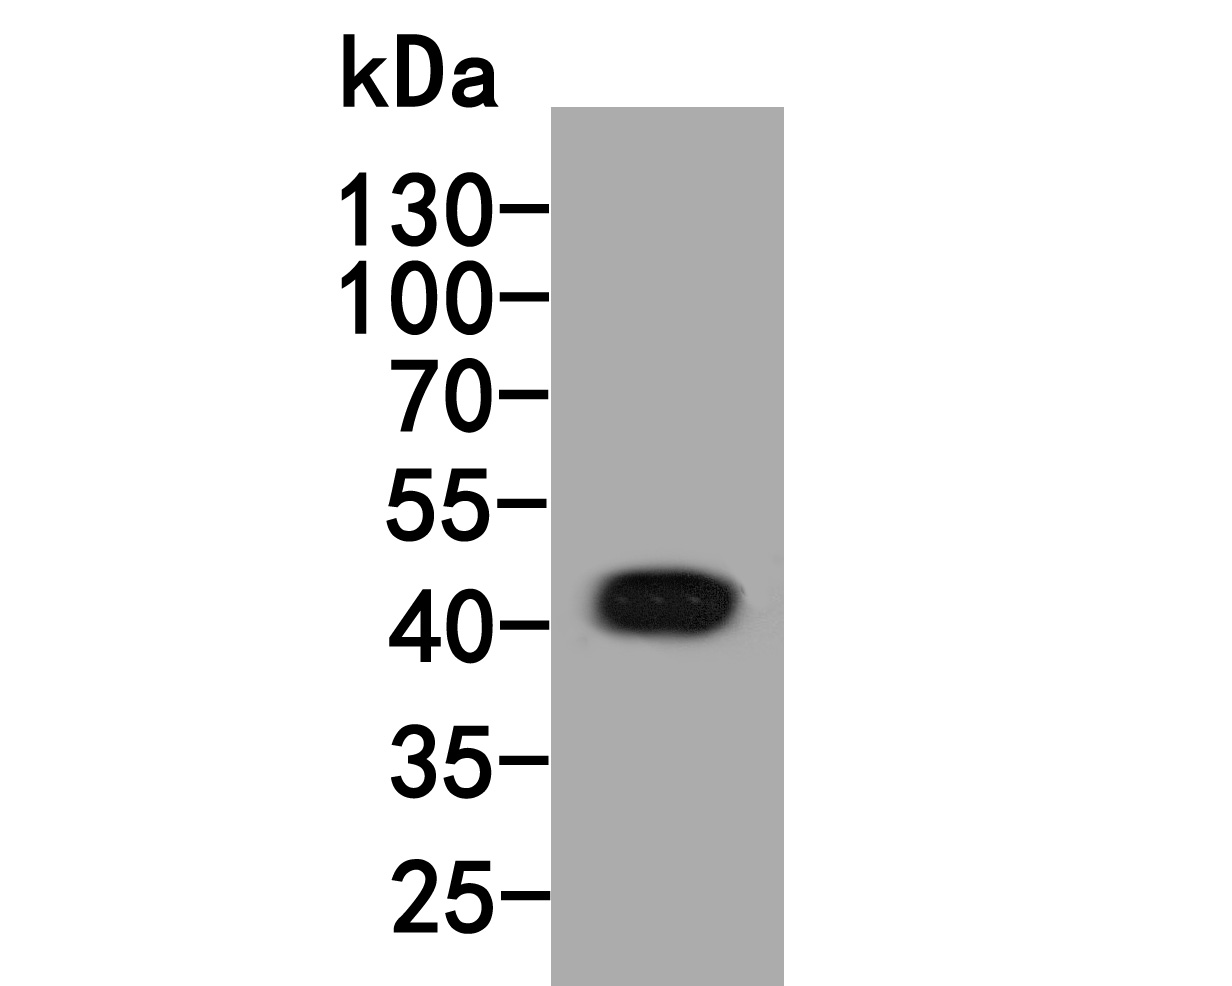 Western blot analysis of Inhibin alpha chain on rat testis tissue lysates. Proteins were transferred to a PVDF membrane and blocked with 5% NFDM/TBST for 1 hour at room temperature. The primary antibody (HA500272, 1/1,000) was used in 5% NFDM/TBST at room temperature for 2 hours. Goat Anti-Rabbit IgG - HRP Secondary Antibody (HA1001) at 1:200,000 dilution was used for 1 hour at room temperature.